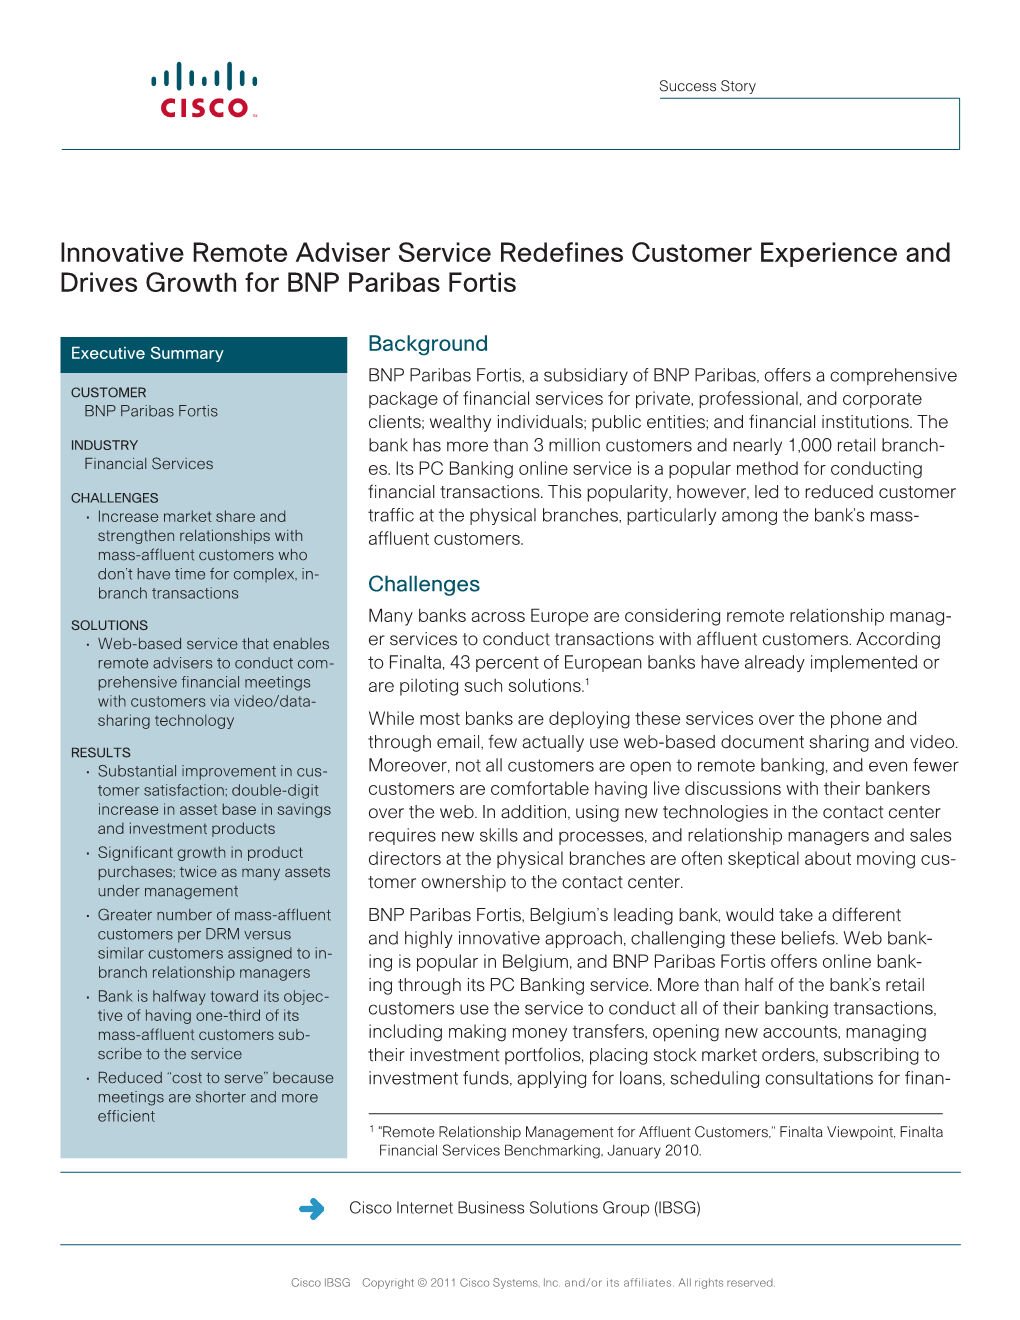 Innovative Remote Adviser Service Redefines Customer Experience and Drives Growth for BNP Paribas Fortis